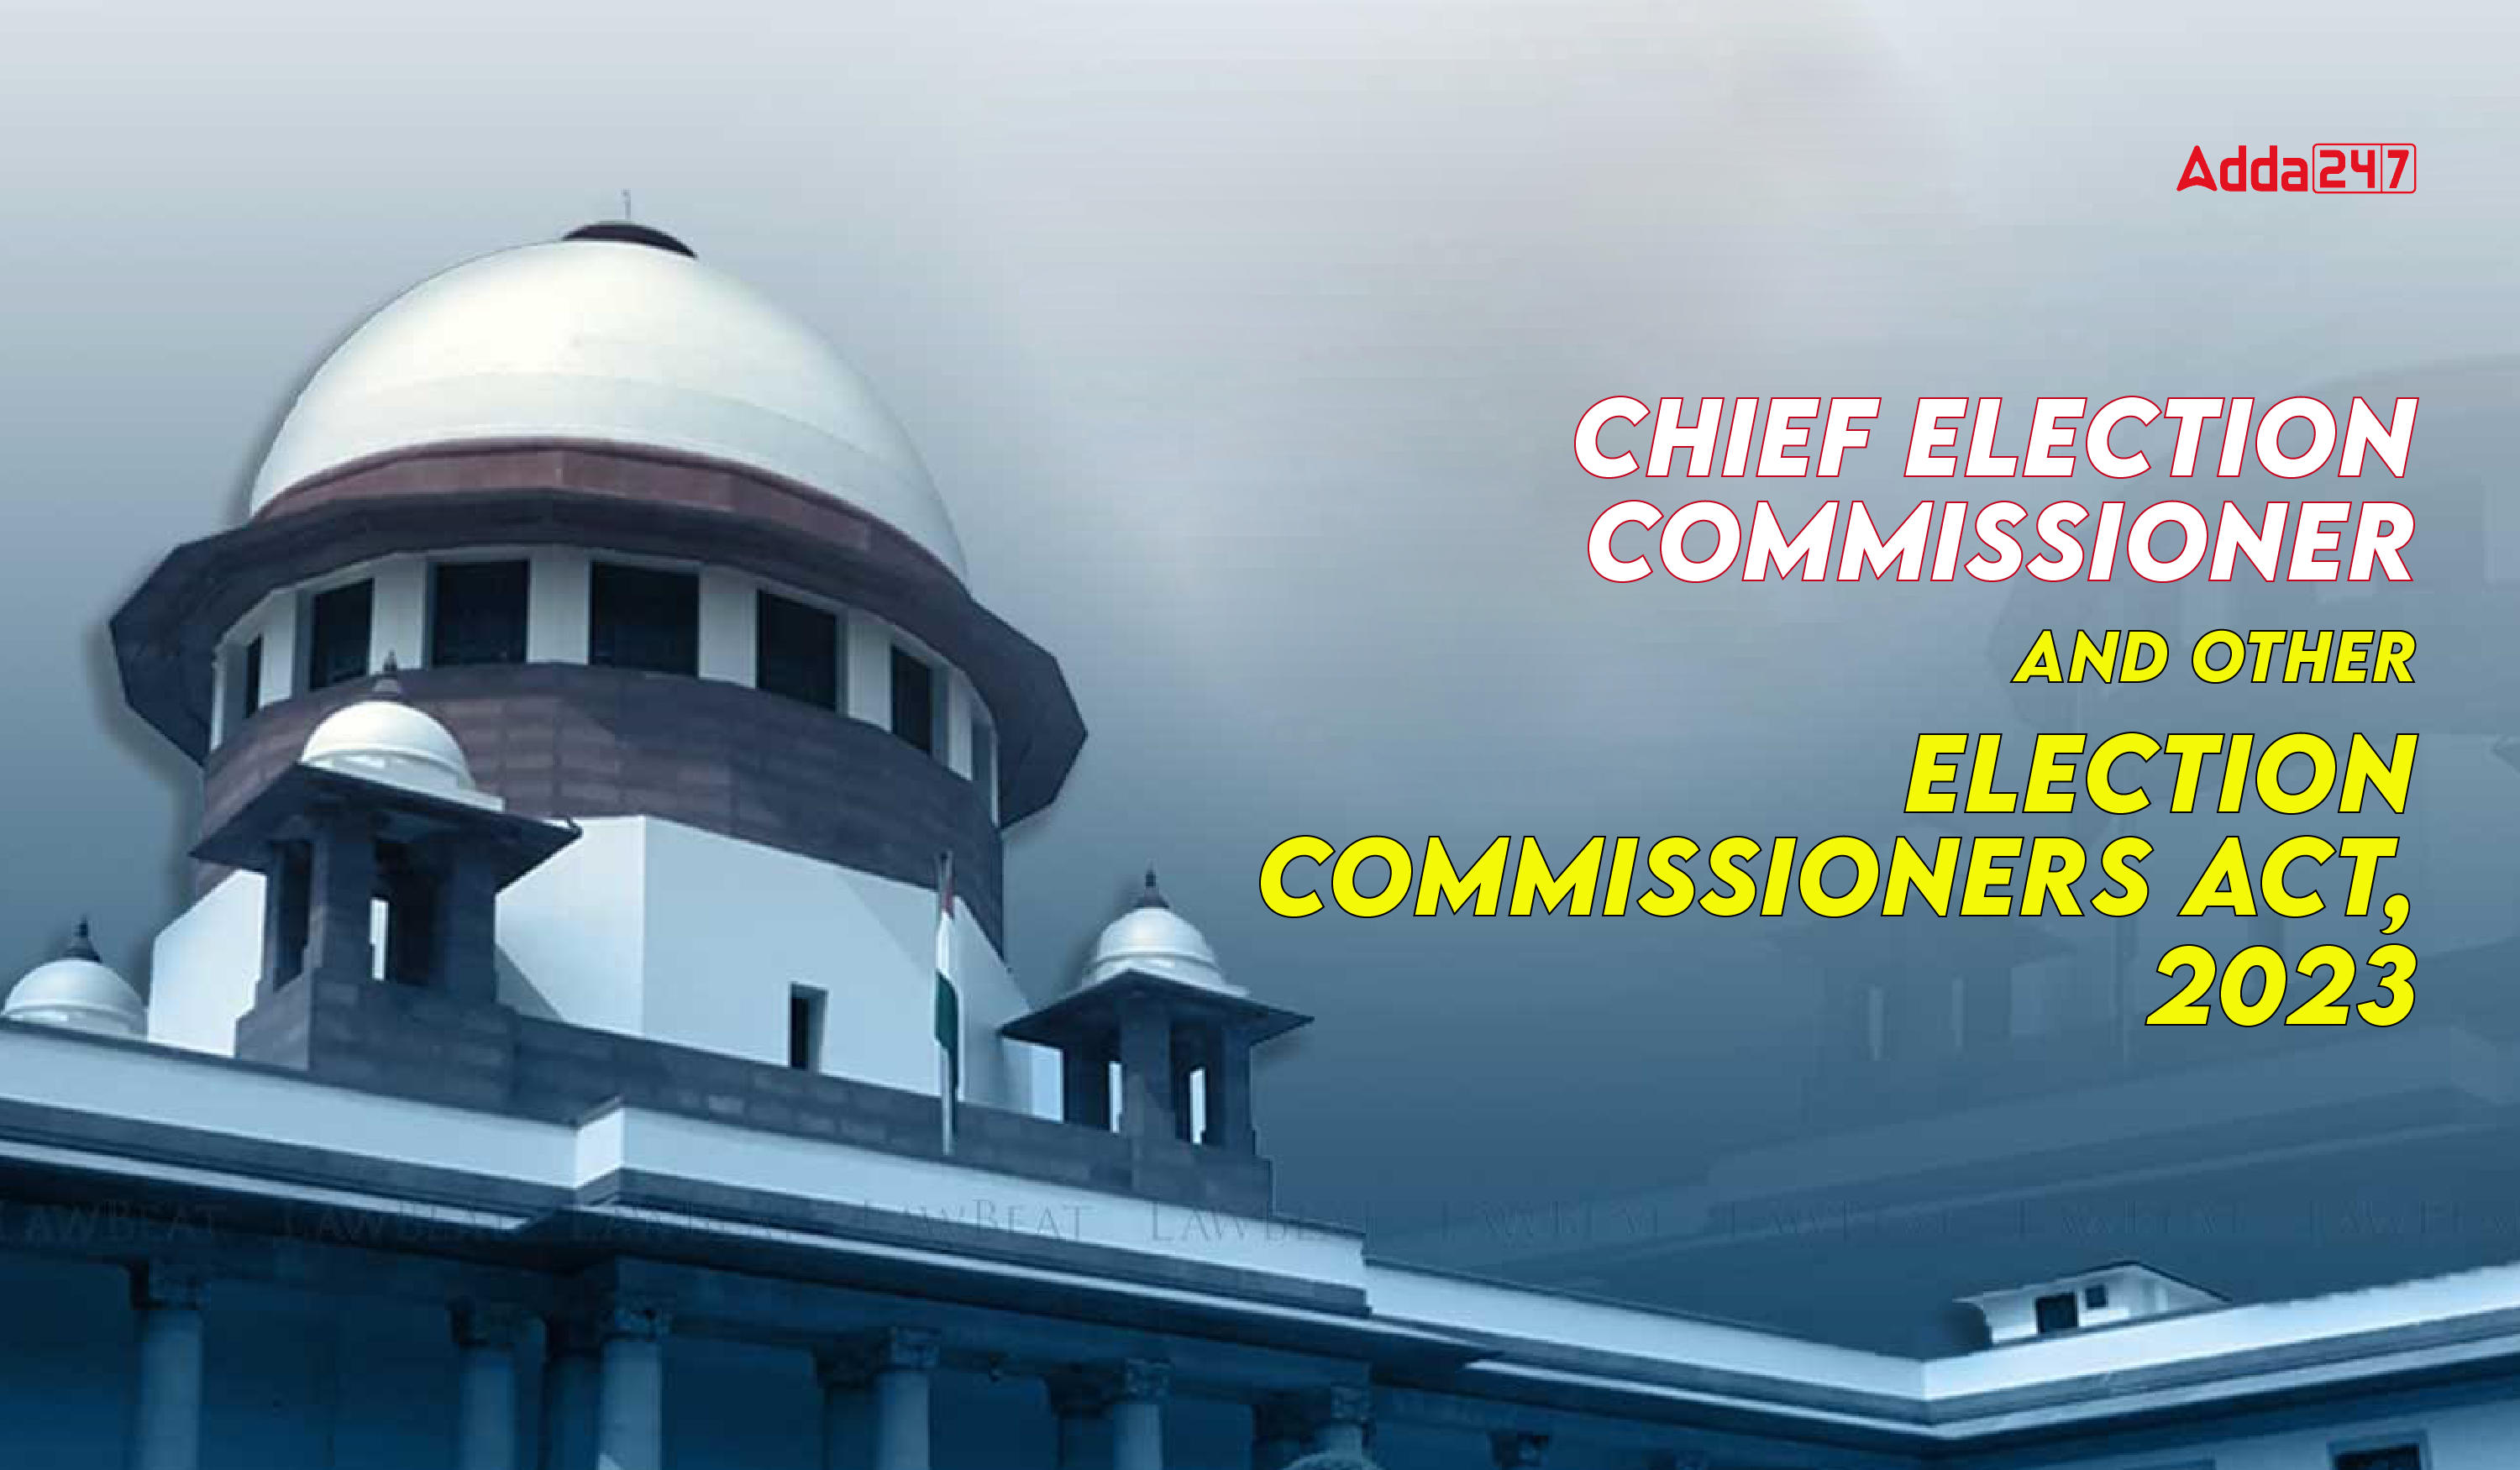 Chief Election Commissioner and Other Election Commissioners Act, 2023